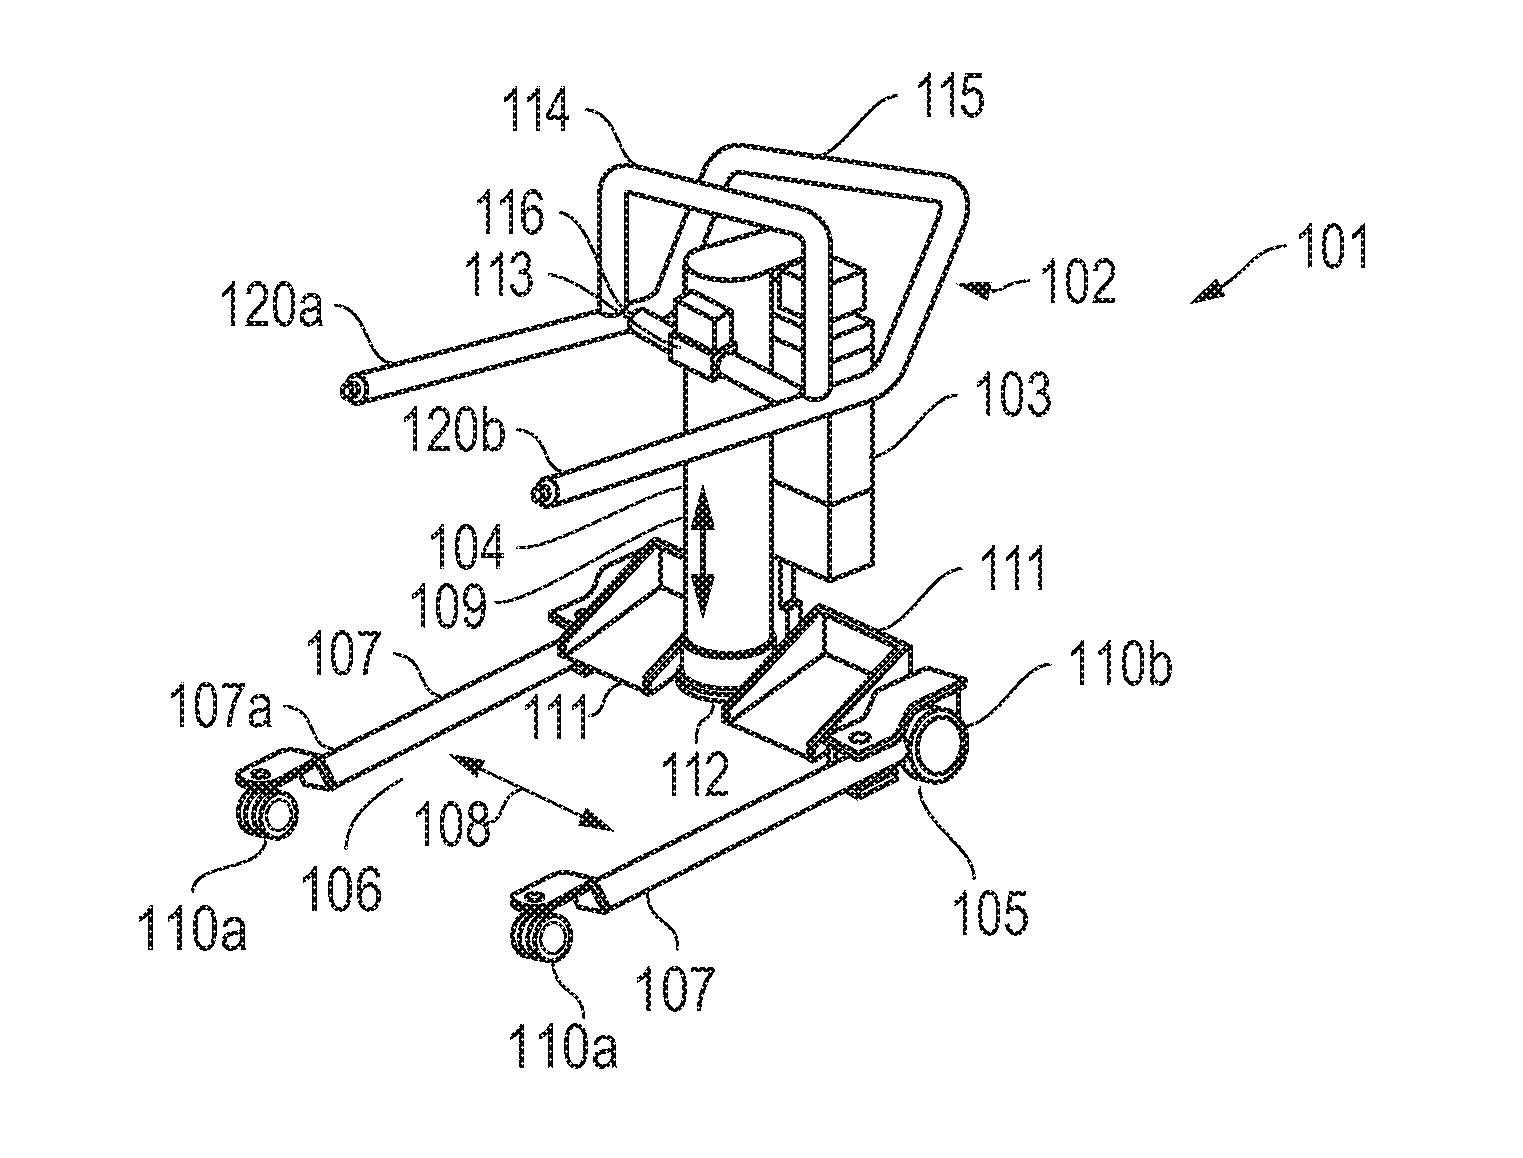 Multi-functional patient transfer device